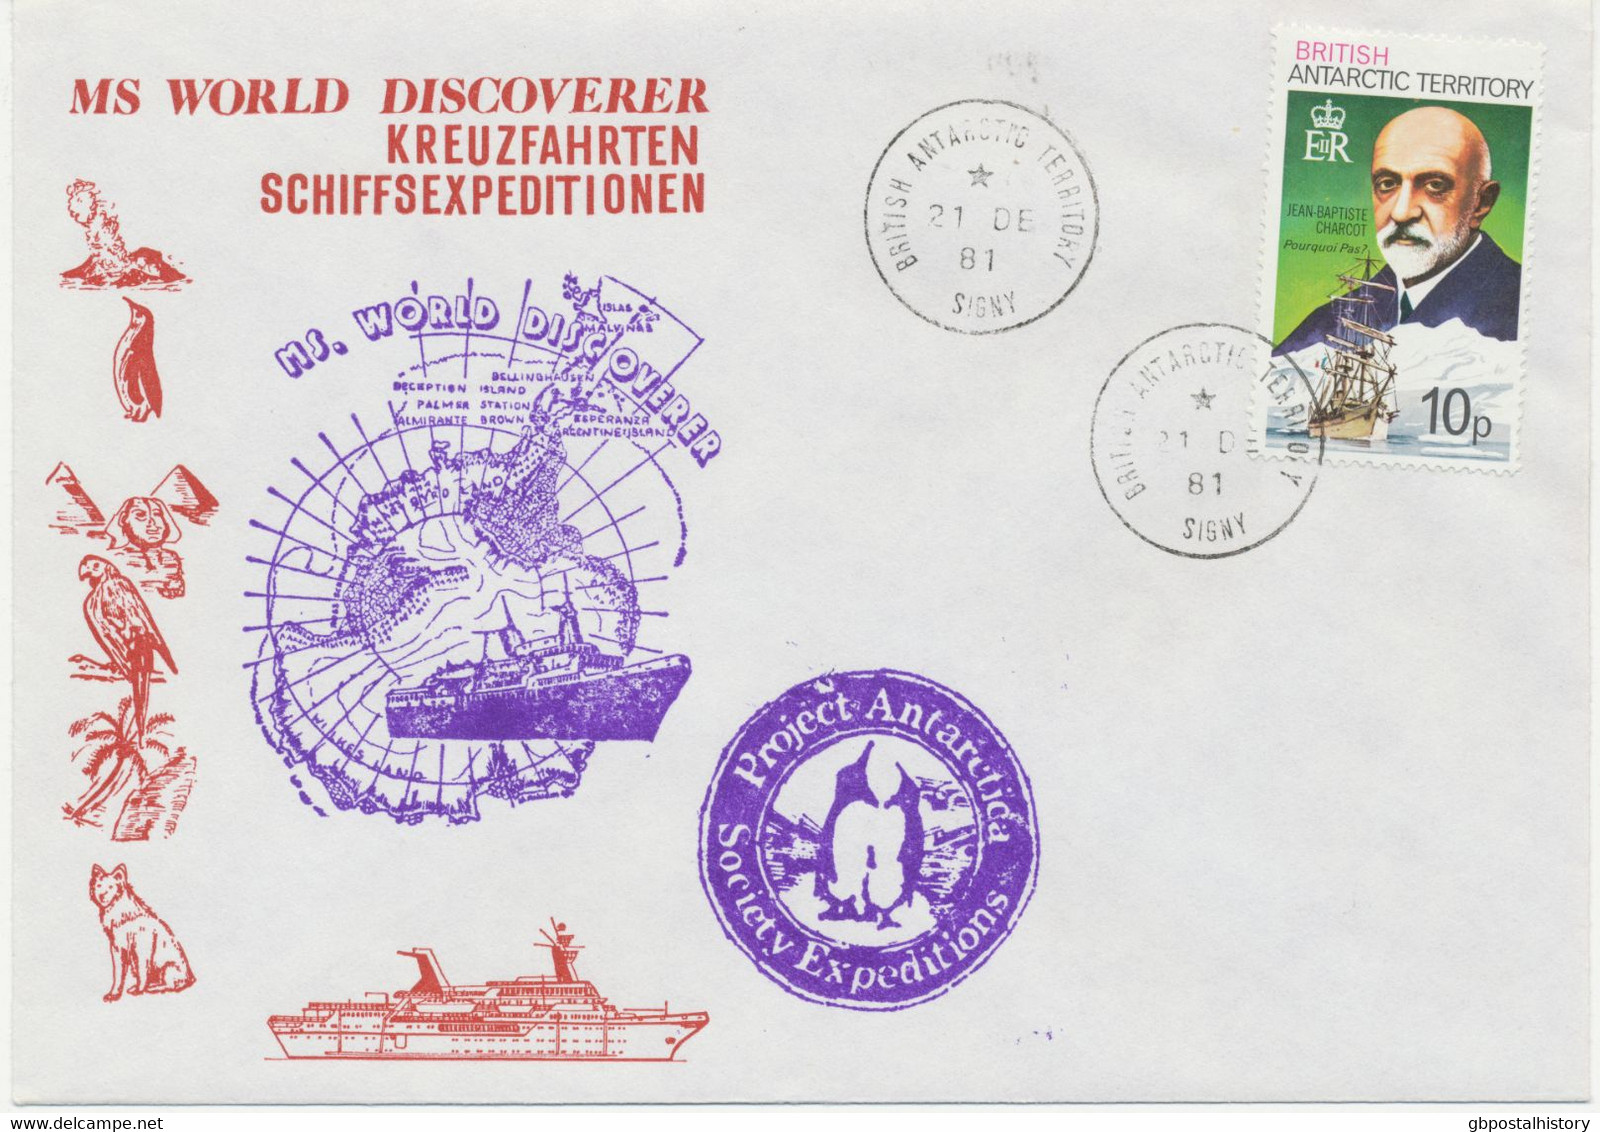 BRITISH ANTARCTIC TERRITORY 1981 Extremely Rare MS World Discoverer Expedition - Covers & Documents